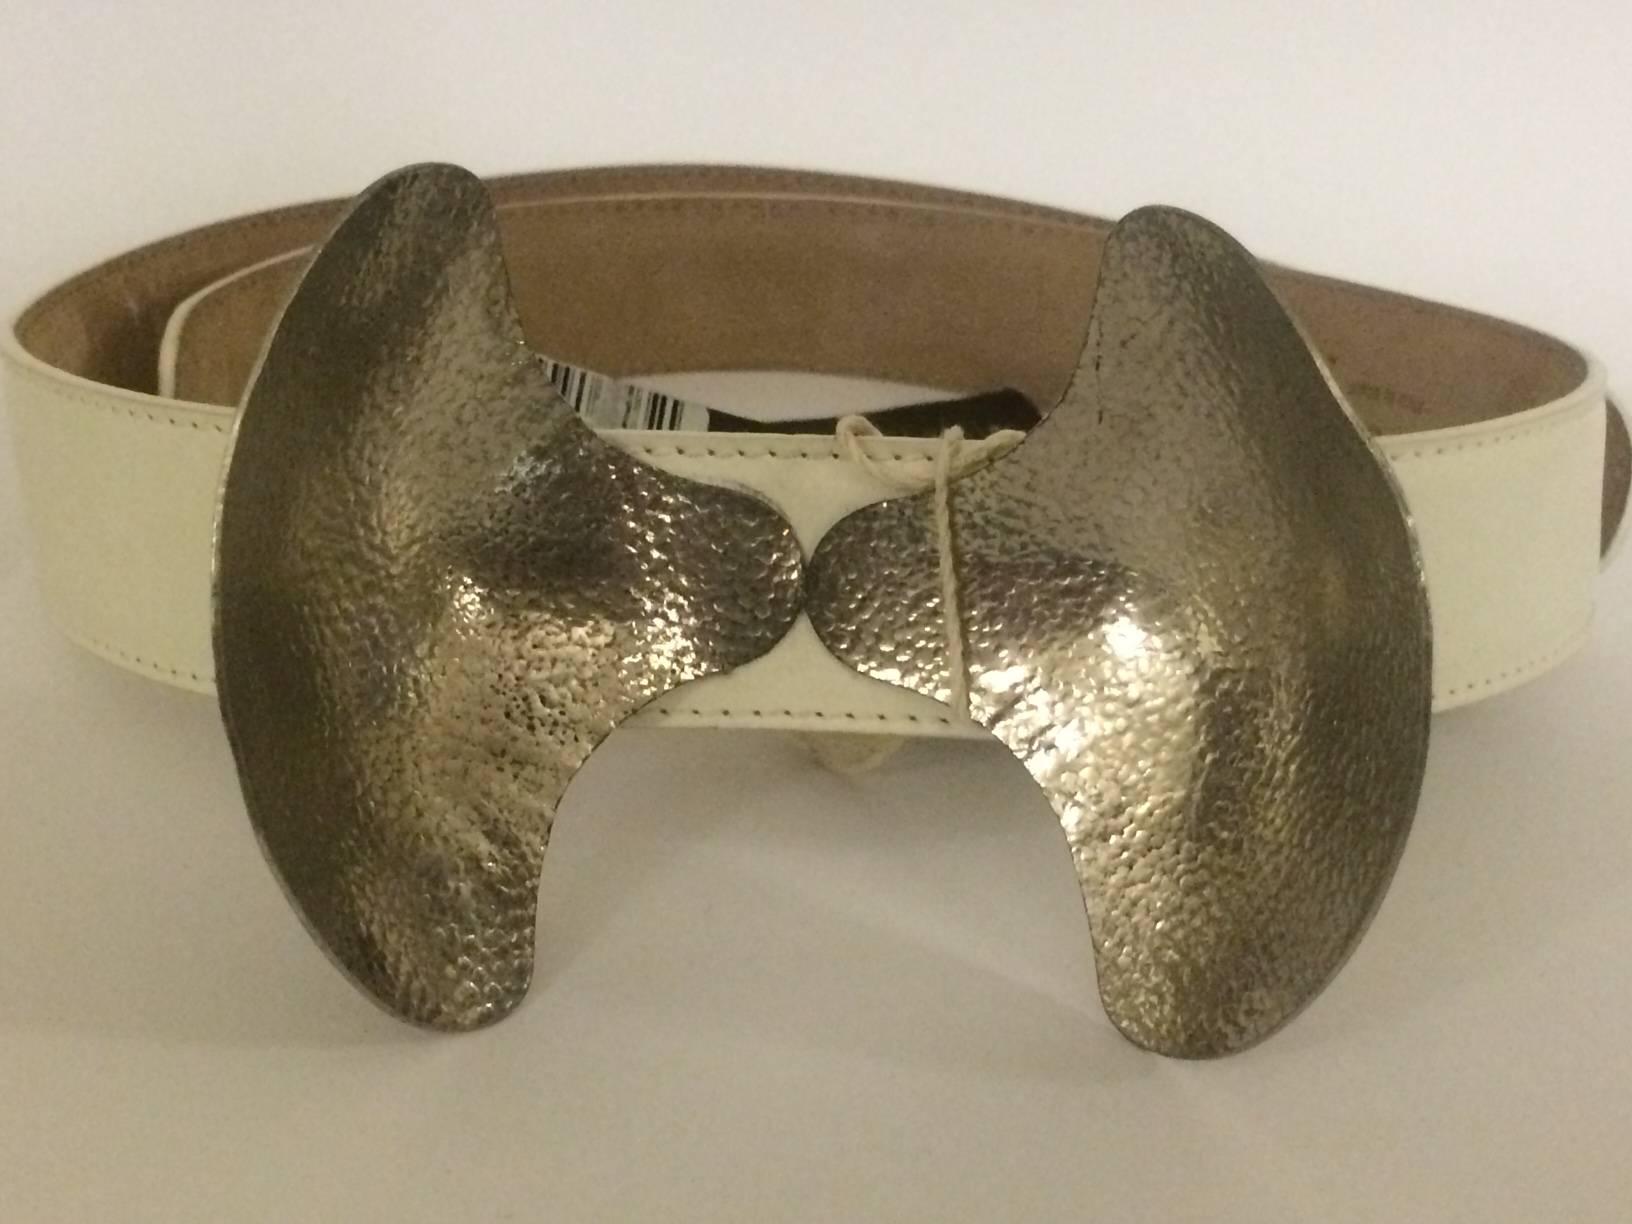 Alexander McQueen by Sarah Burton white leather belt with slightly distressed hammered silver clam shell shapes forming bow. Adjustable snap closure.

Total length 35 1/2